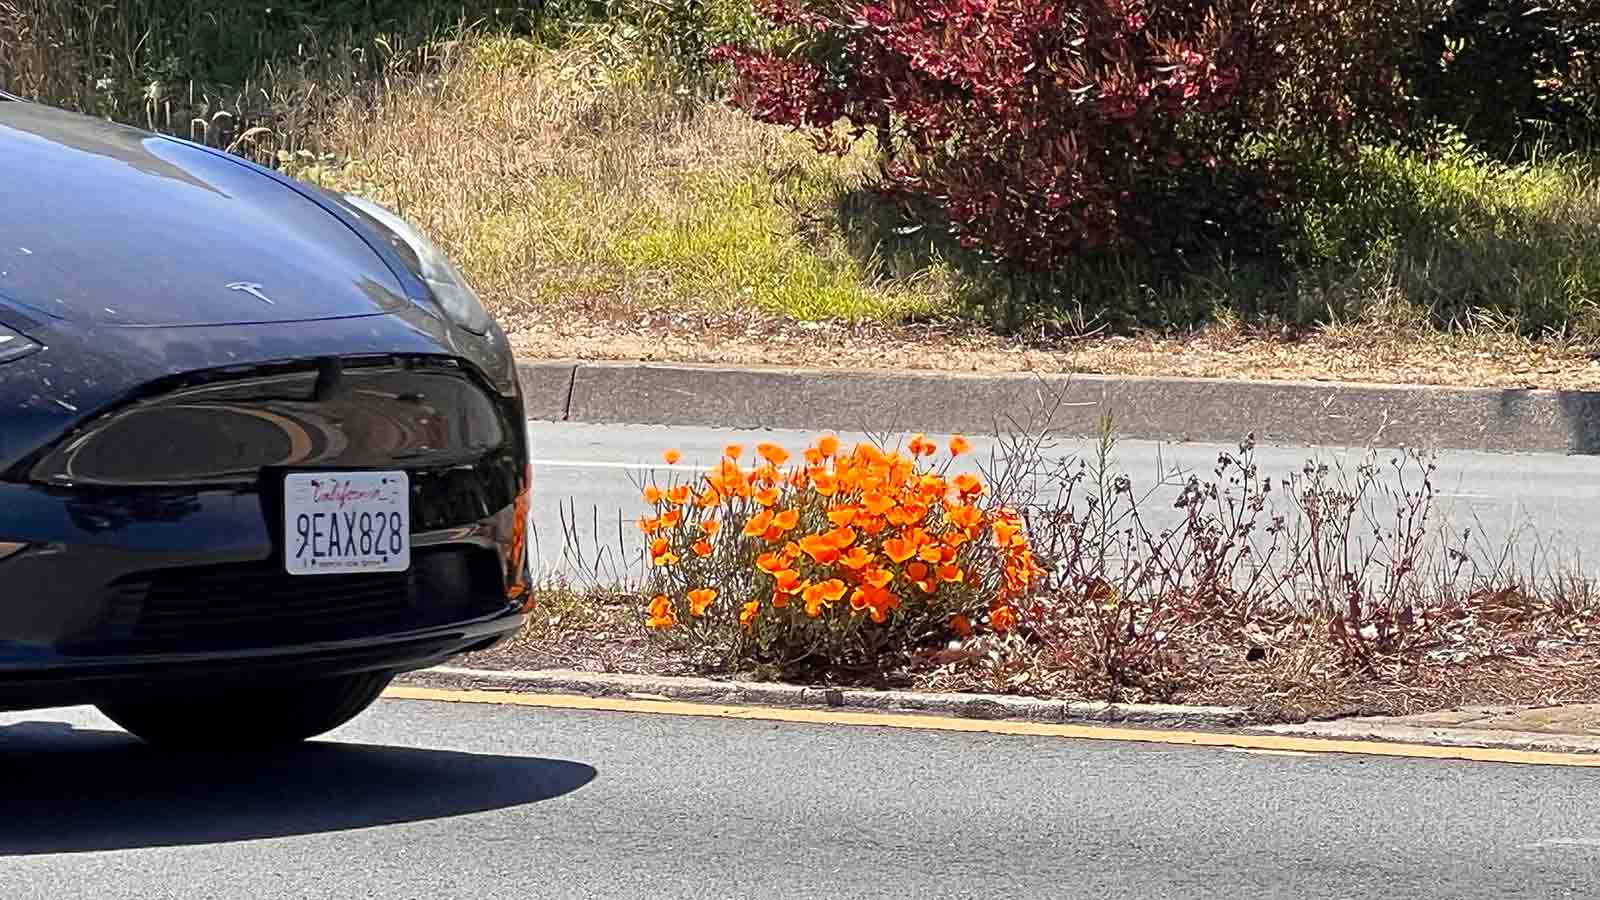 Poppies on the highway